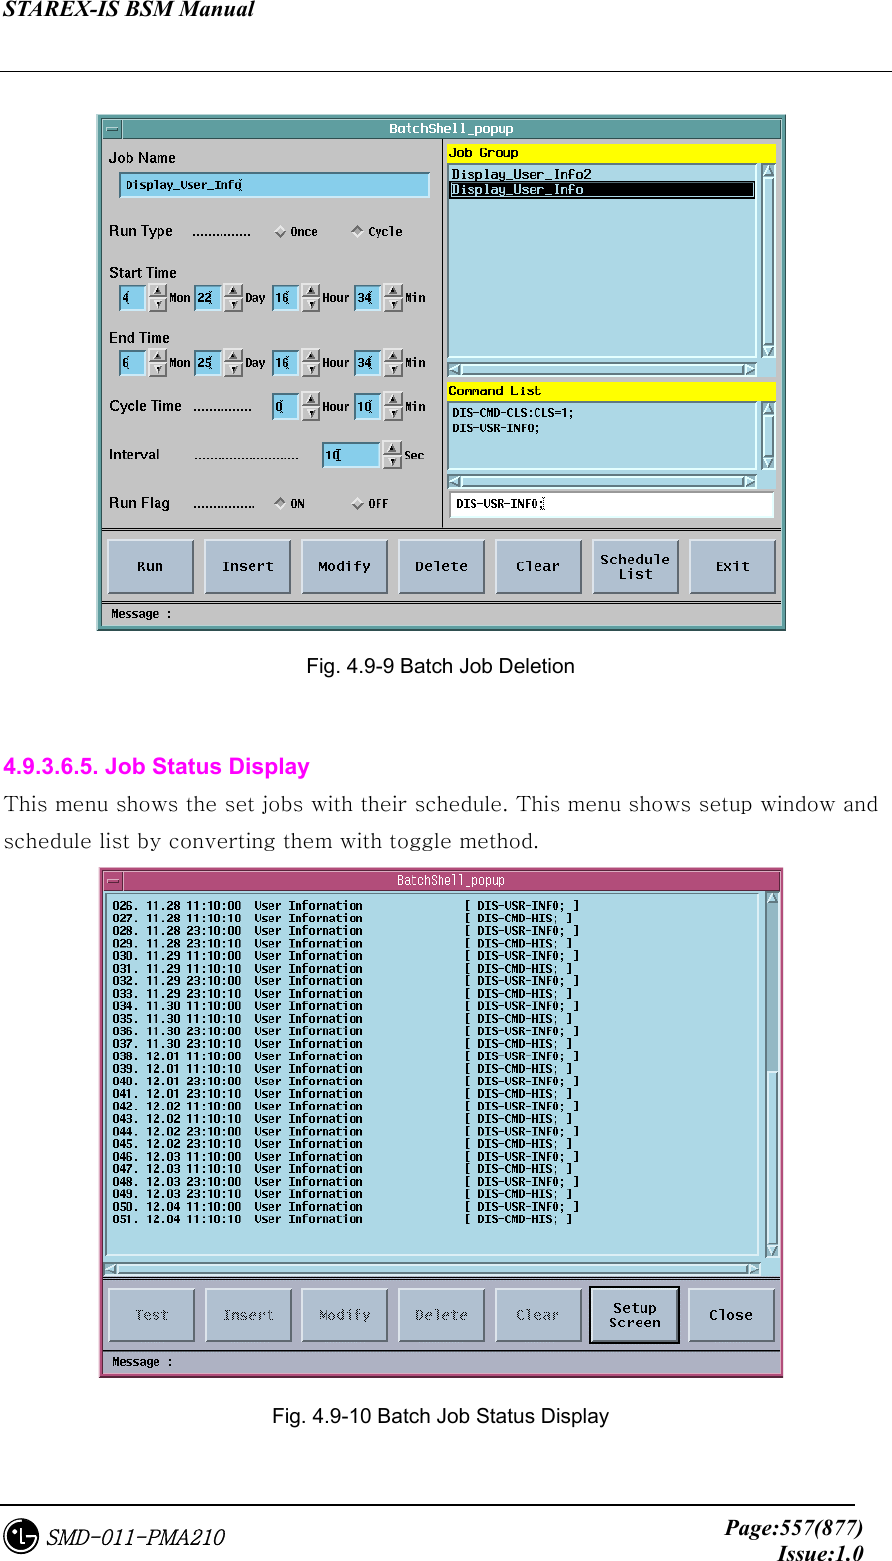 STAREX-IS BSM Manual     Page:557(877)Issue:1.0SMD-011-PMA210   Fig. 4.9-9 Batch Job Deletion  4.9.3.6.5. Job Status Display This menu shows the set jobs with their schedule. This menu shows setup window and schedule list by converting them with toggle method.  Fig. 4.9-10 Batch Job Status Display 